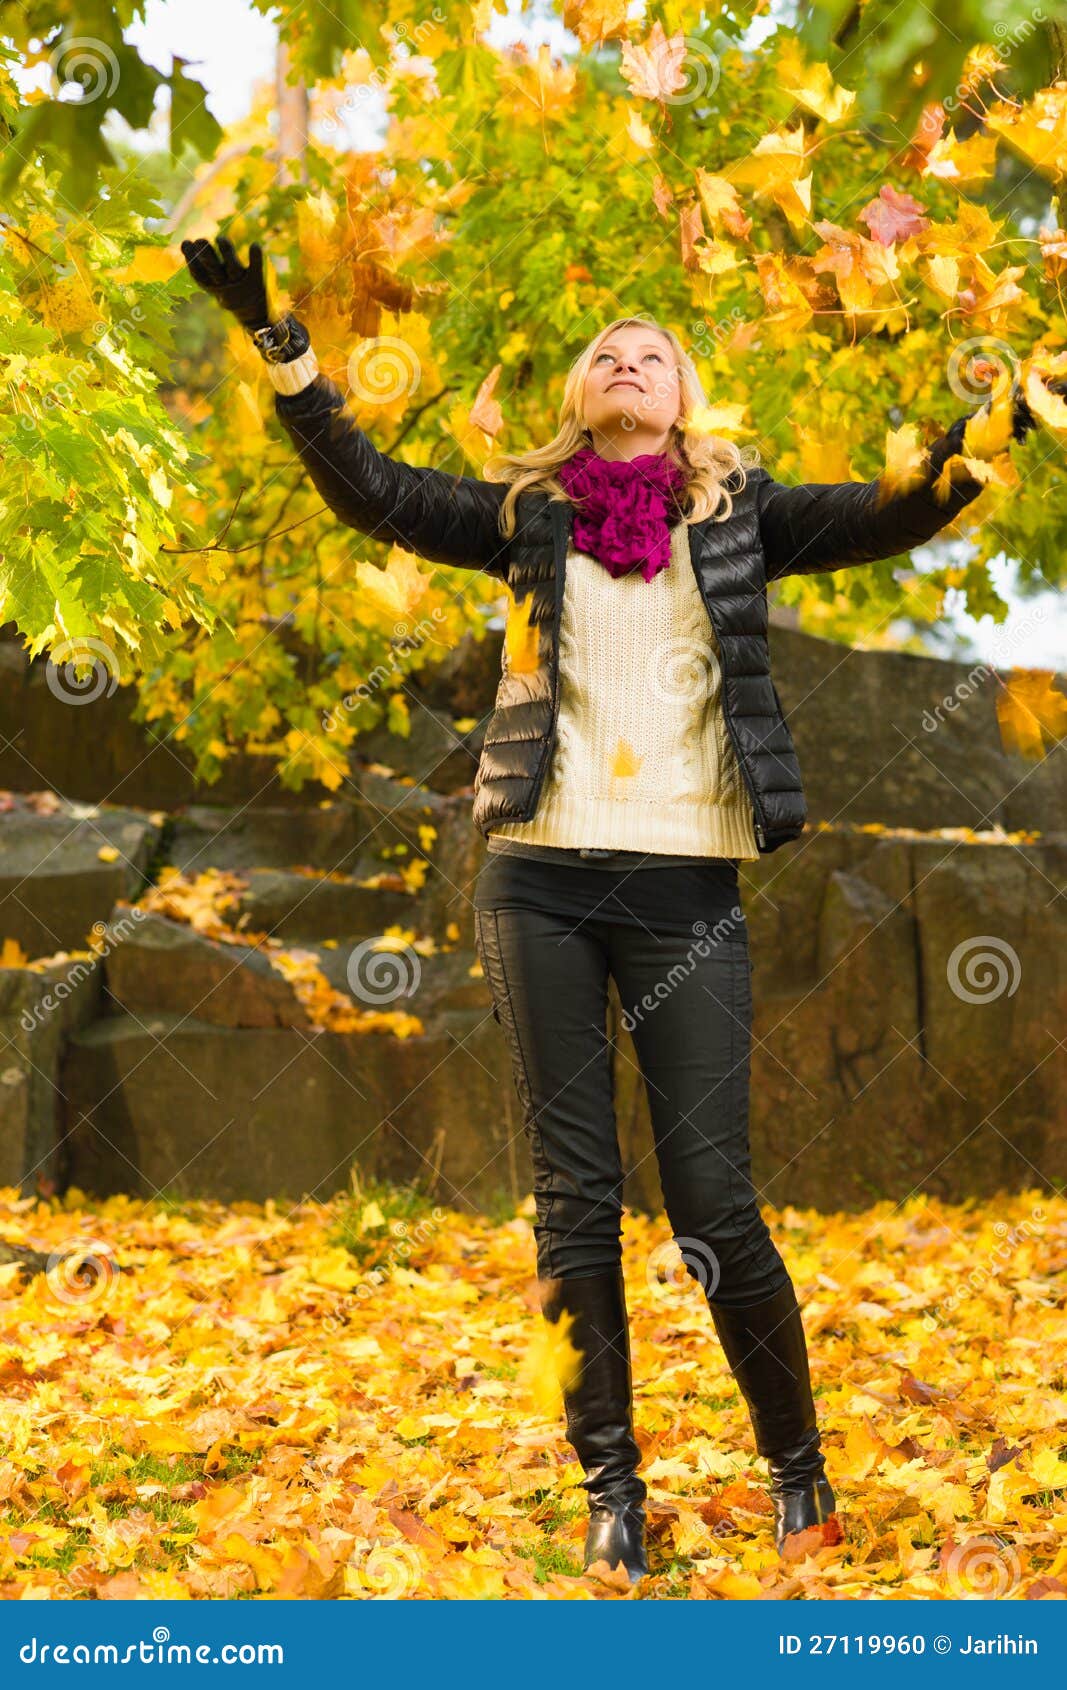 Falling leaves stock photo. Image of green, hand, colorful - 27119960